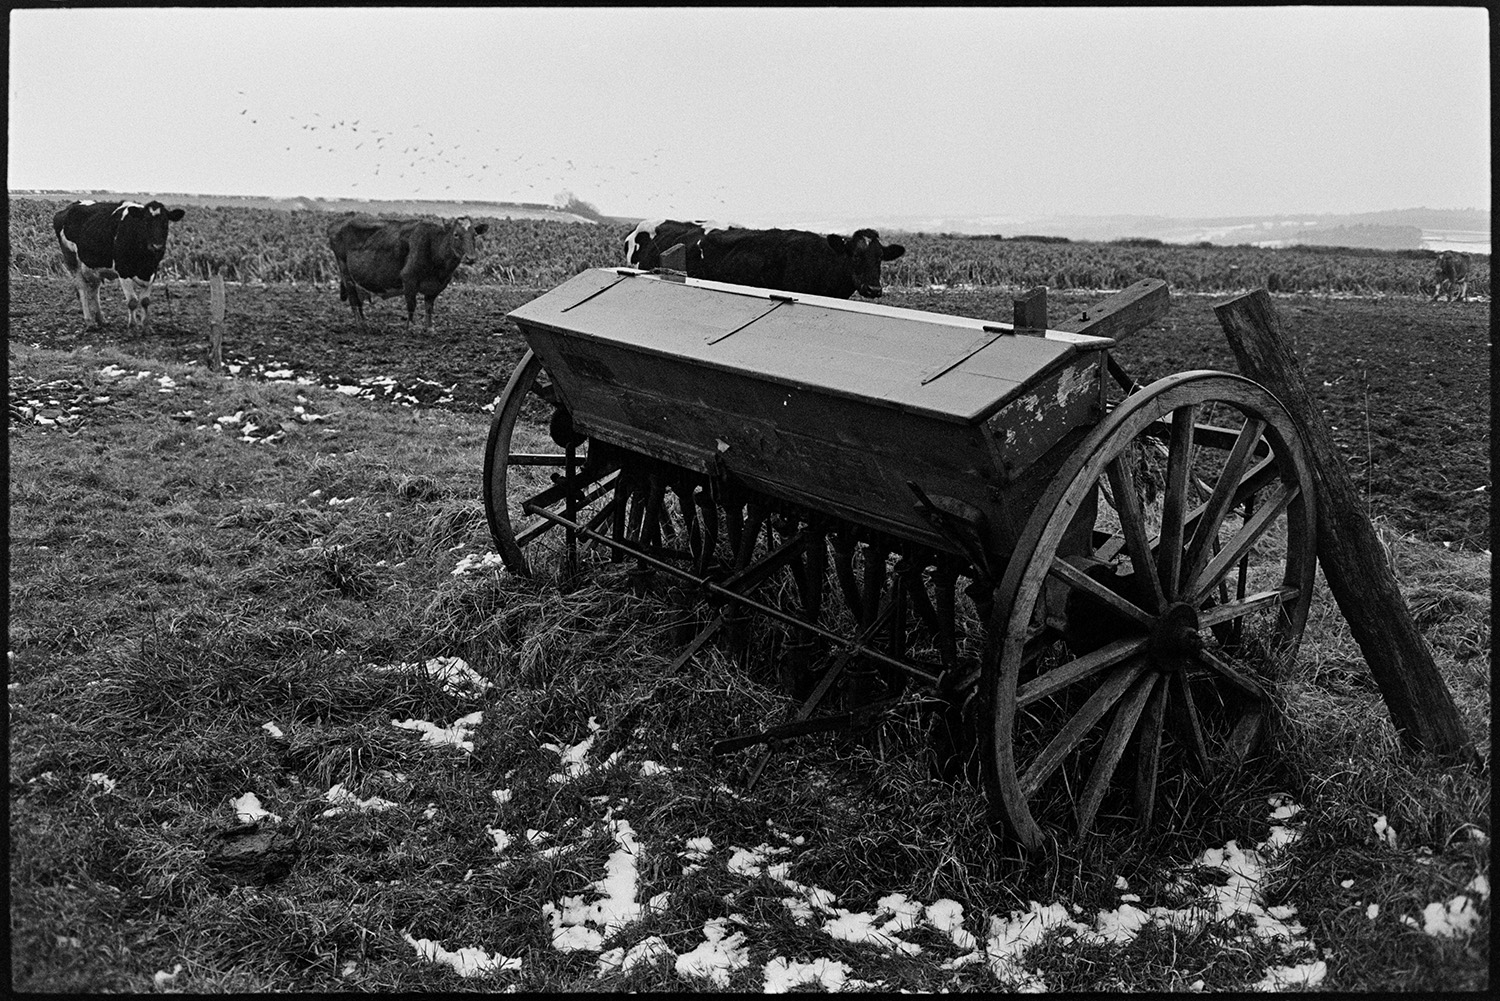 A piece of farm machinery, possibly a seed drill, in a field at Jeffrys, Beaford, also known as Mill Road Farm. Cattle can be seen in the background and the field has a few patches of snow.